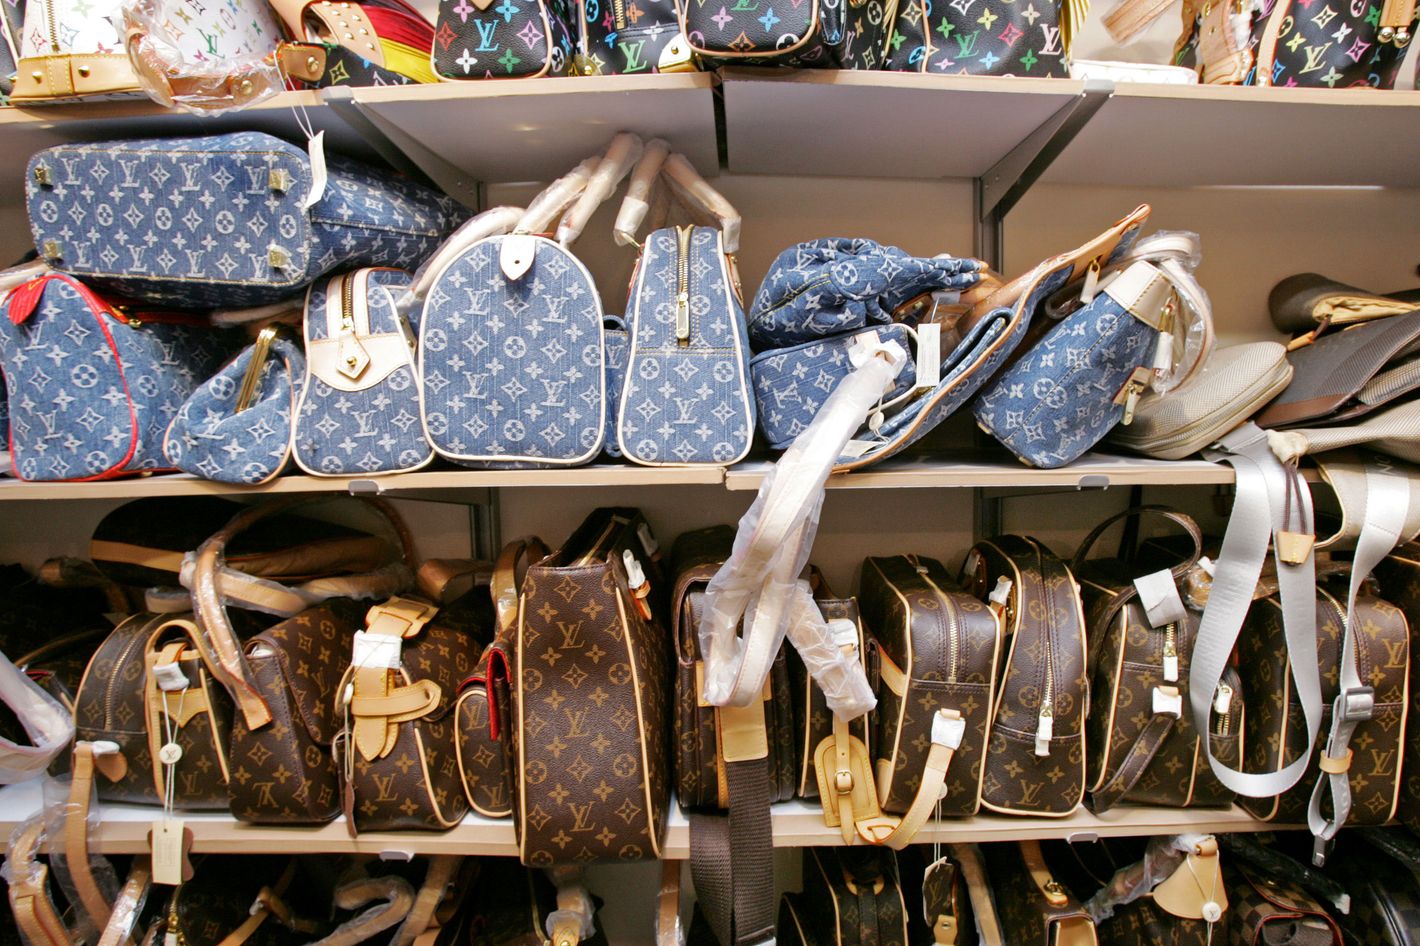 That $250 Louis Vuitton Advertised on Facebook? Yup, It's Fake - Racked